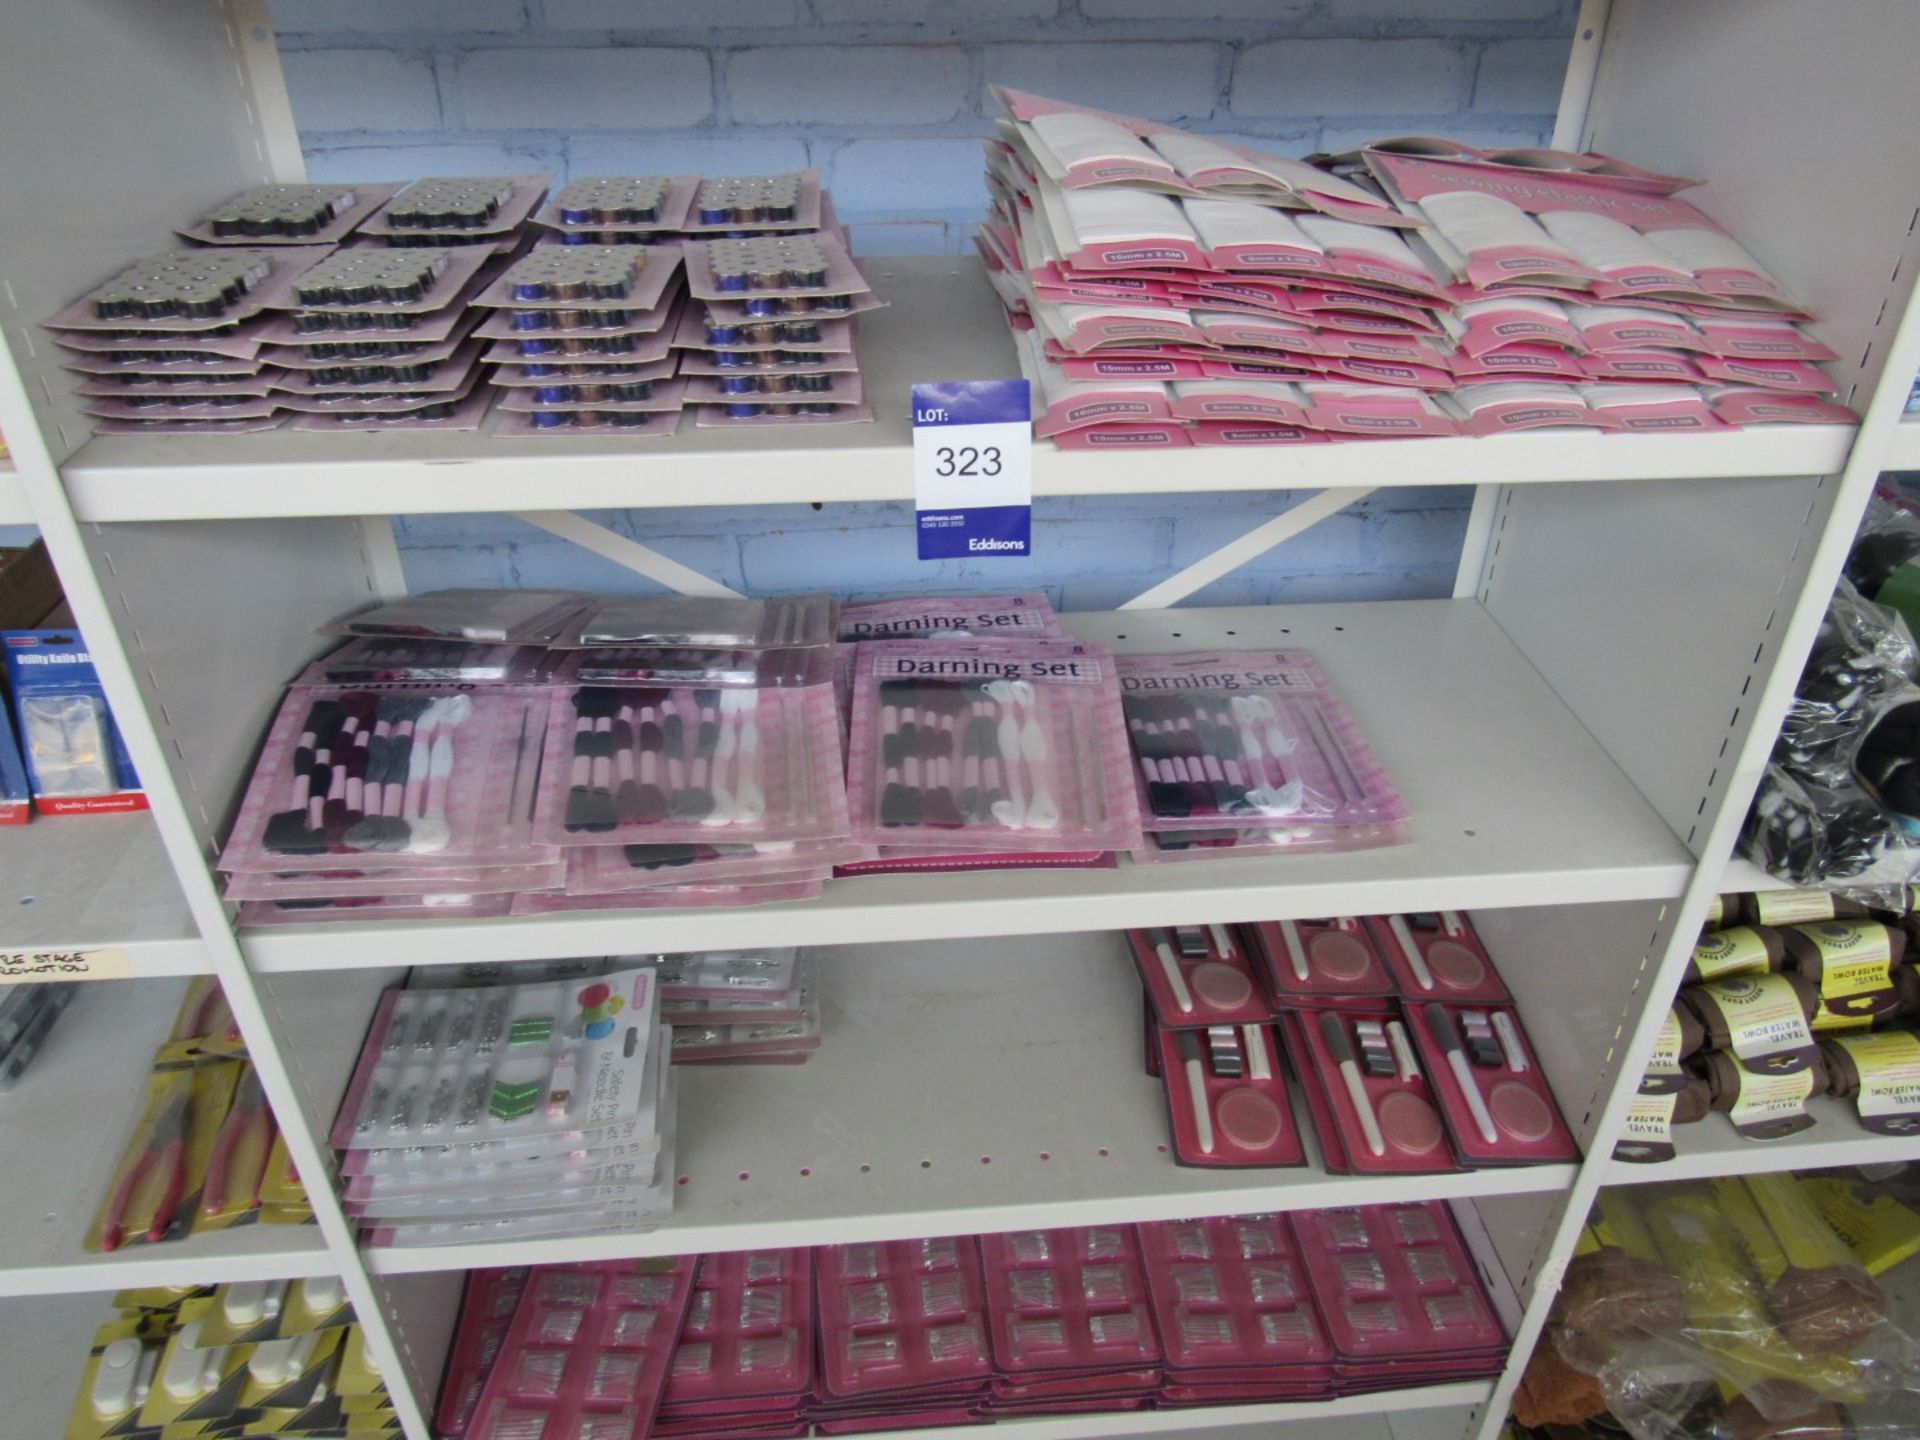 Contents of bay of shelving to include darning sets, sewing elastic, safety pins etc. – shelving not